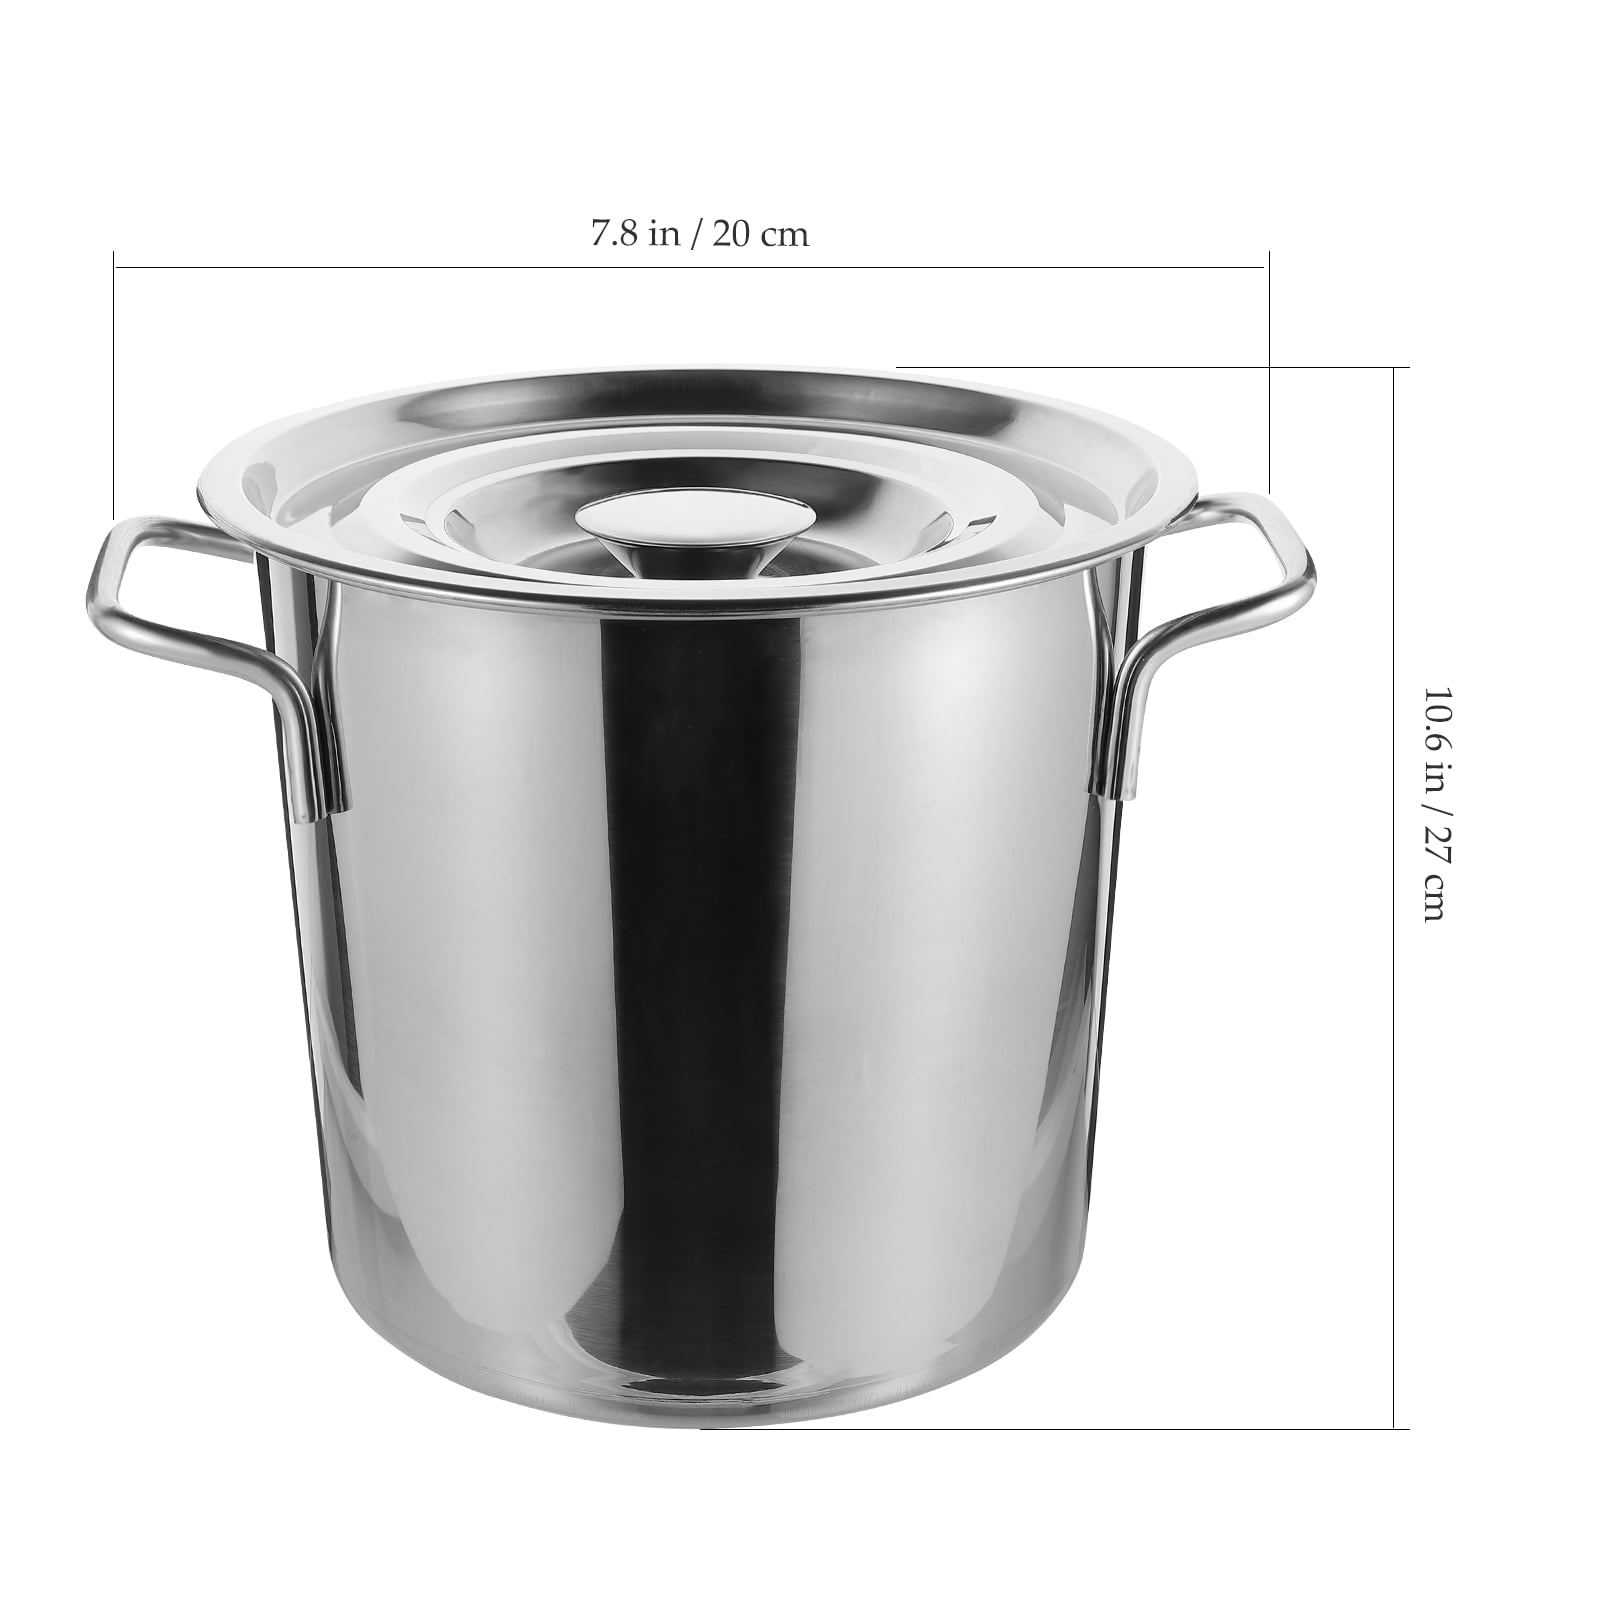 Commercial Stainless Steel Soup Bucket With Lid Pot Large Capacity School  Kitchen Restaurant Hotel Barrel Cookware Cooking - Soup & Stock Pots -  AliExpress